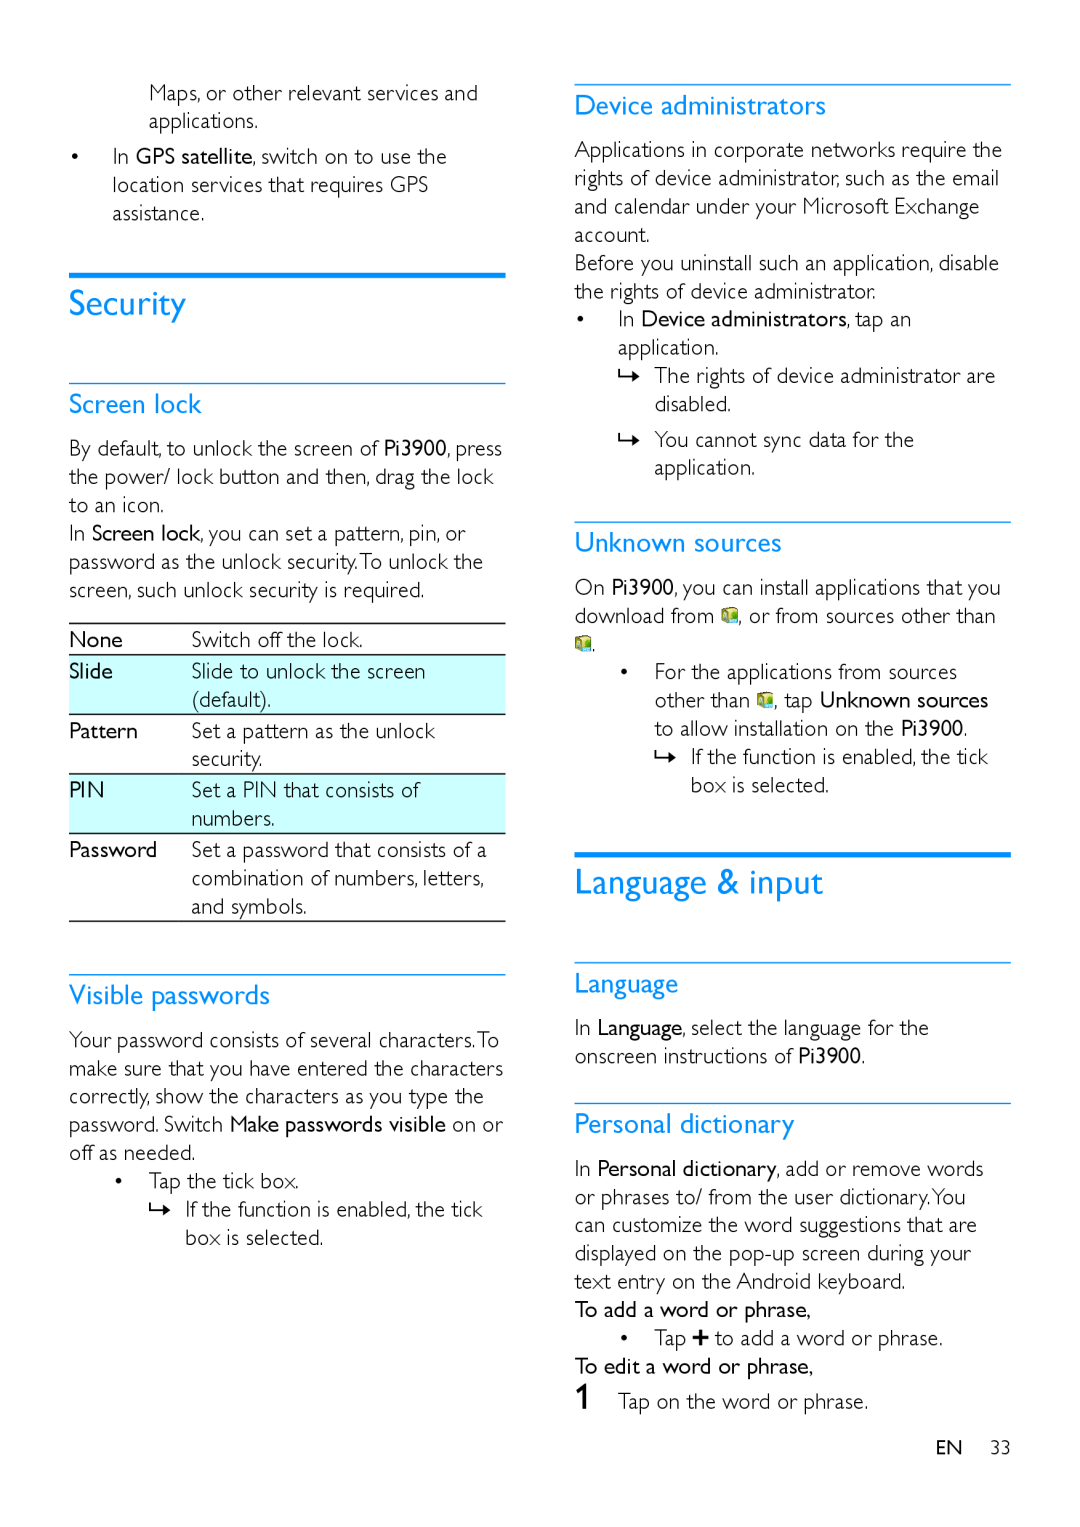 Philips PI3900 manual Security, Language & input, Screen lock, Visible passwords, Device administrators, Unknown sources 